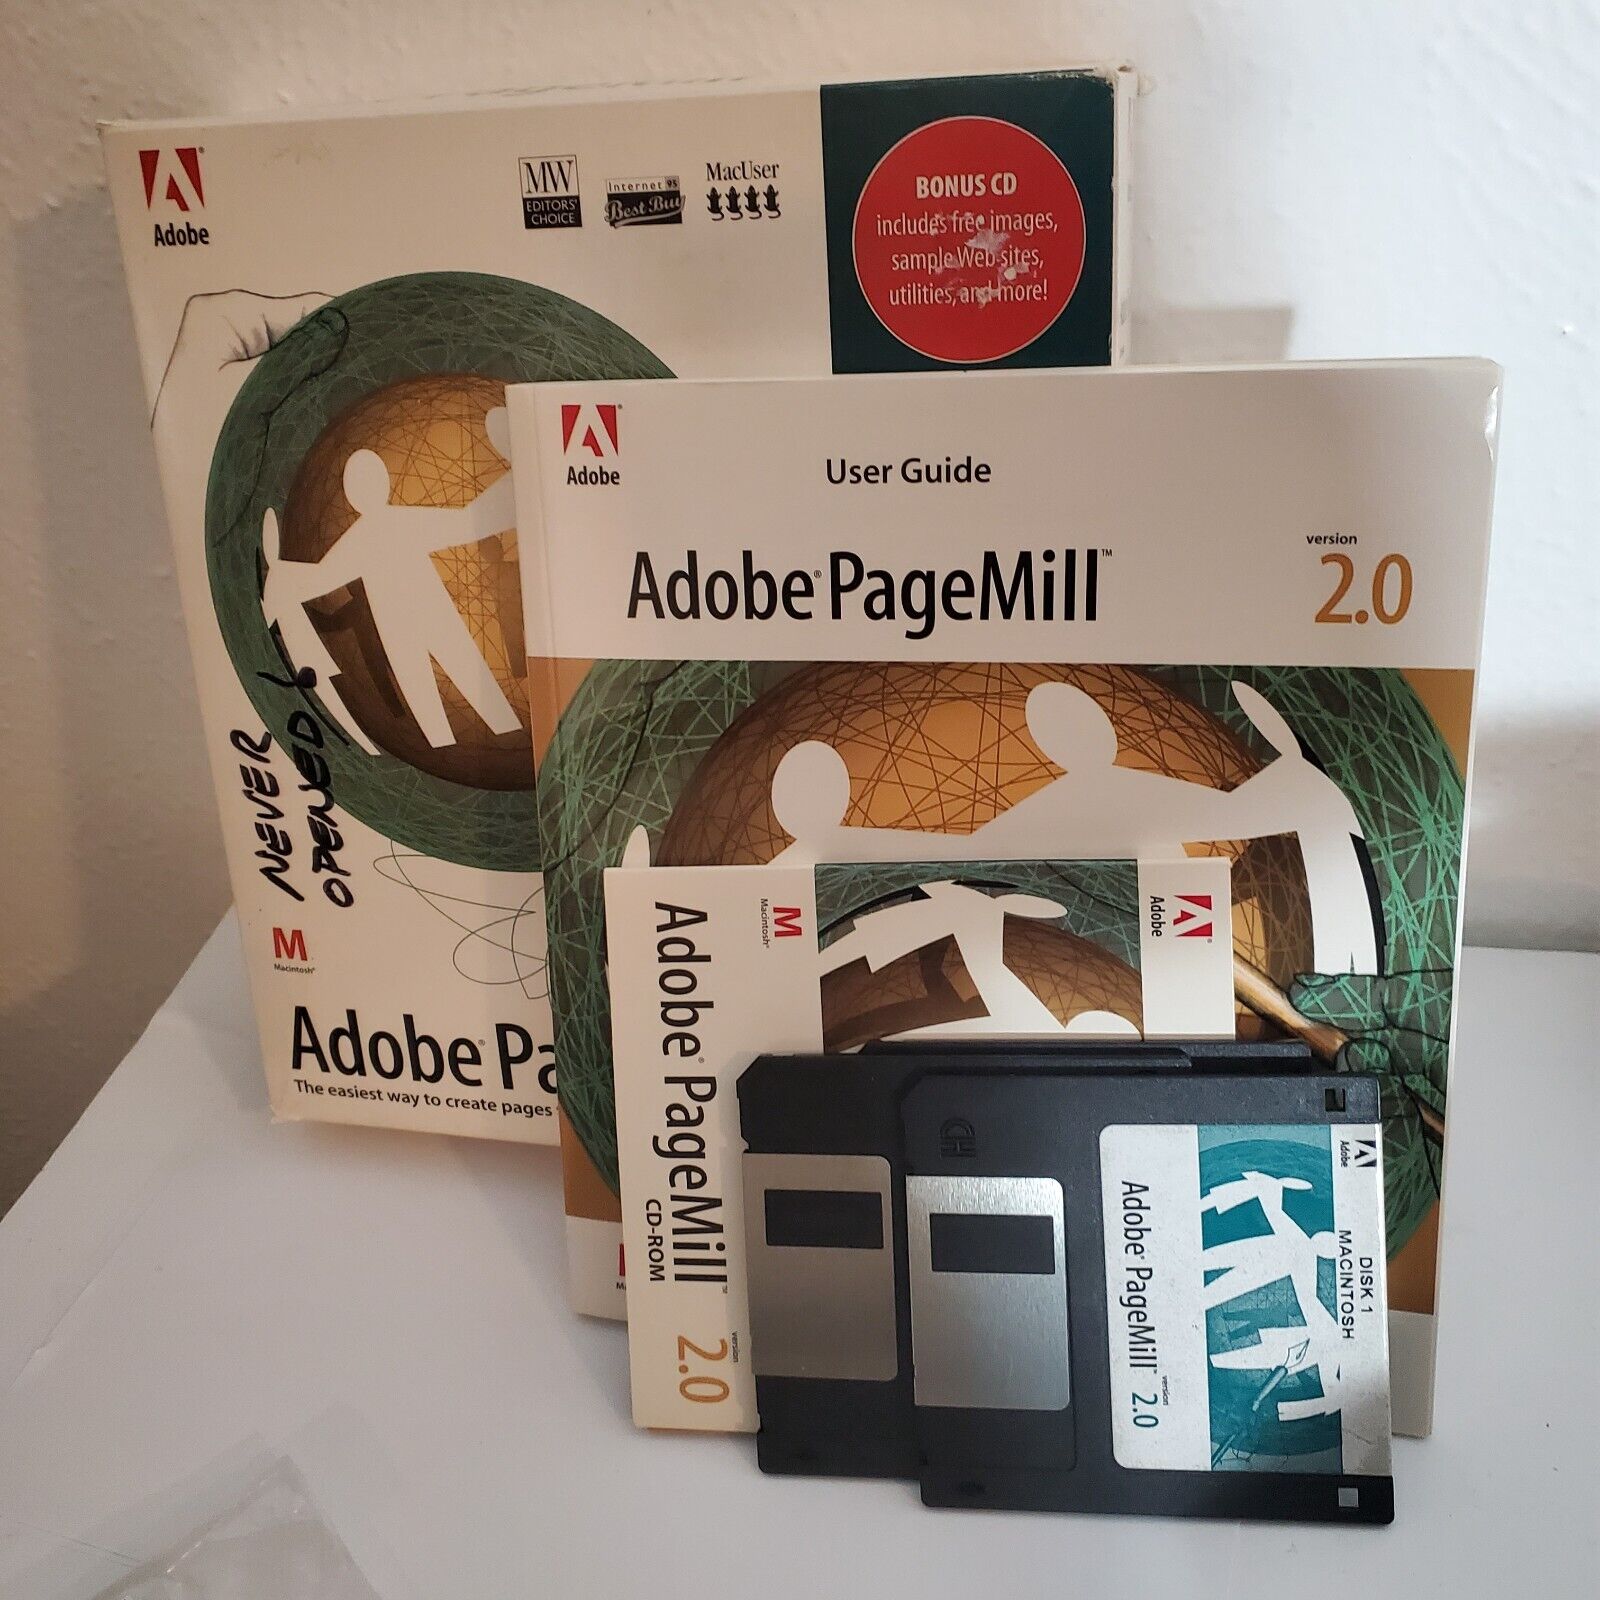 Adobe PageMill 2.0 Macintosh  3 Floppy Drives & Cd  Vintage  Guide Included